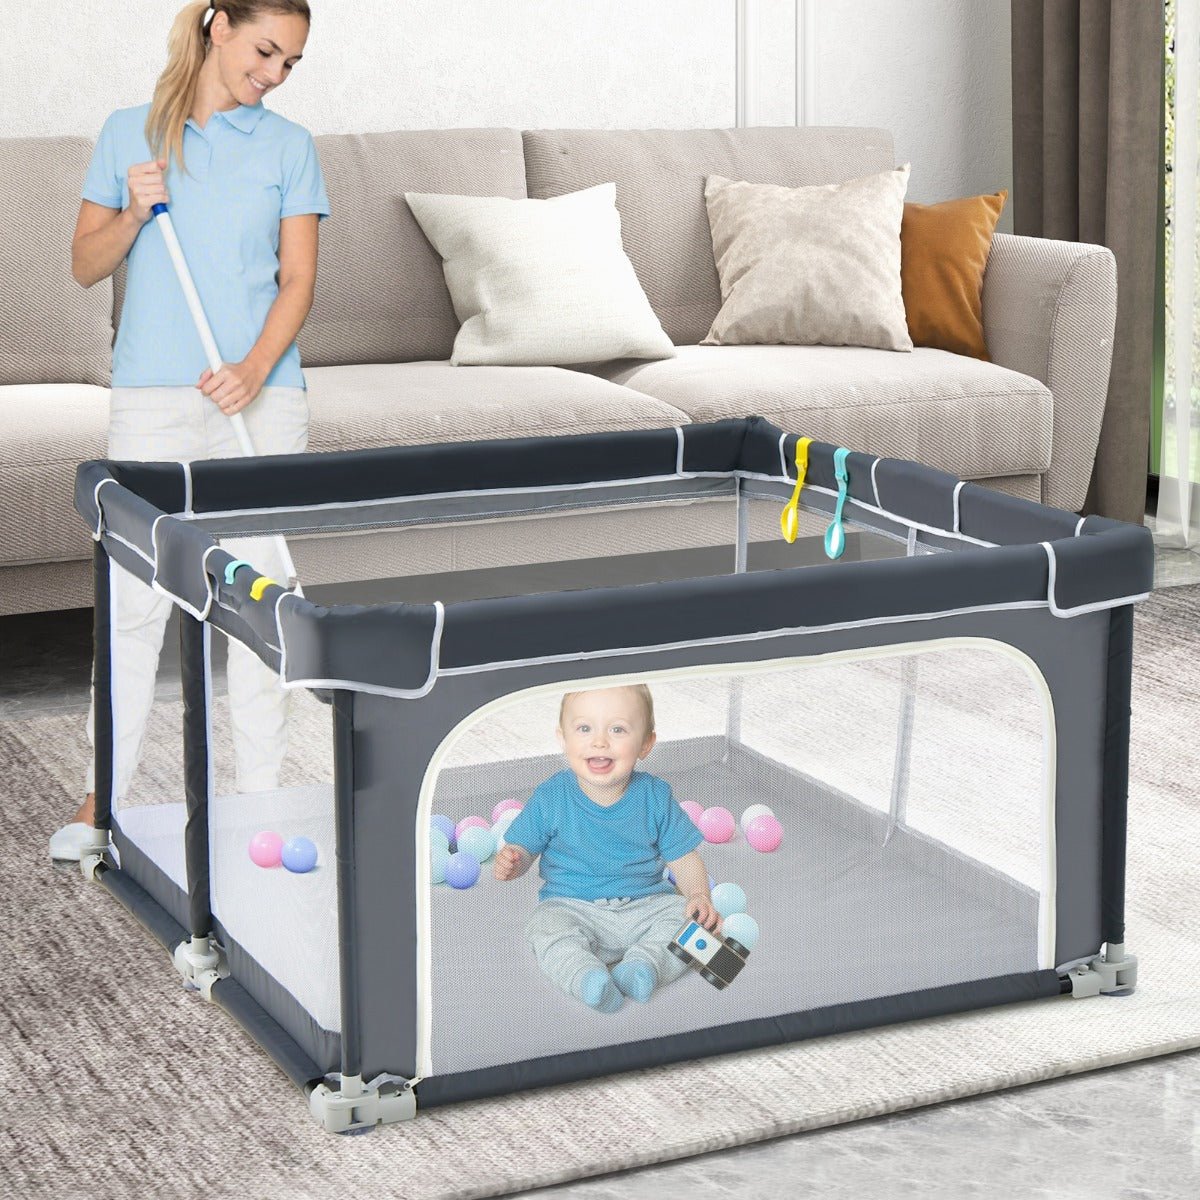 Buy 124cm Foldable Baby Playpen Interactive Activity Center with Balls for Kids-Dark Grey